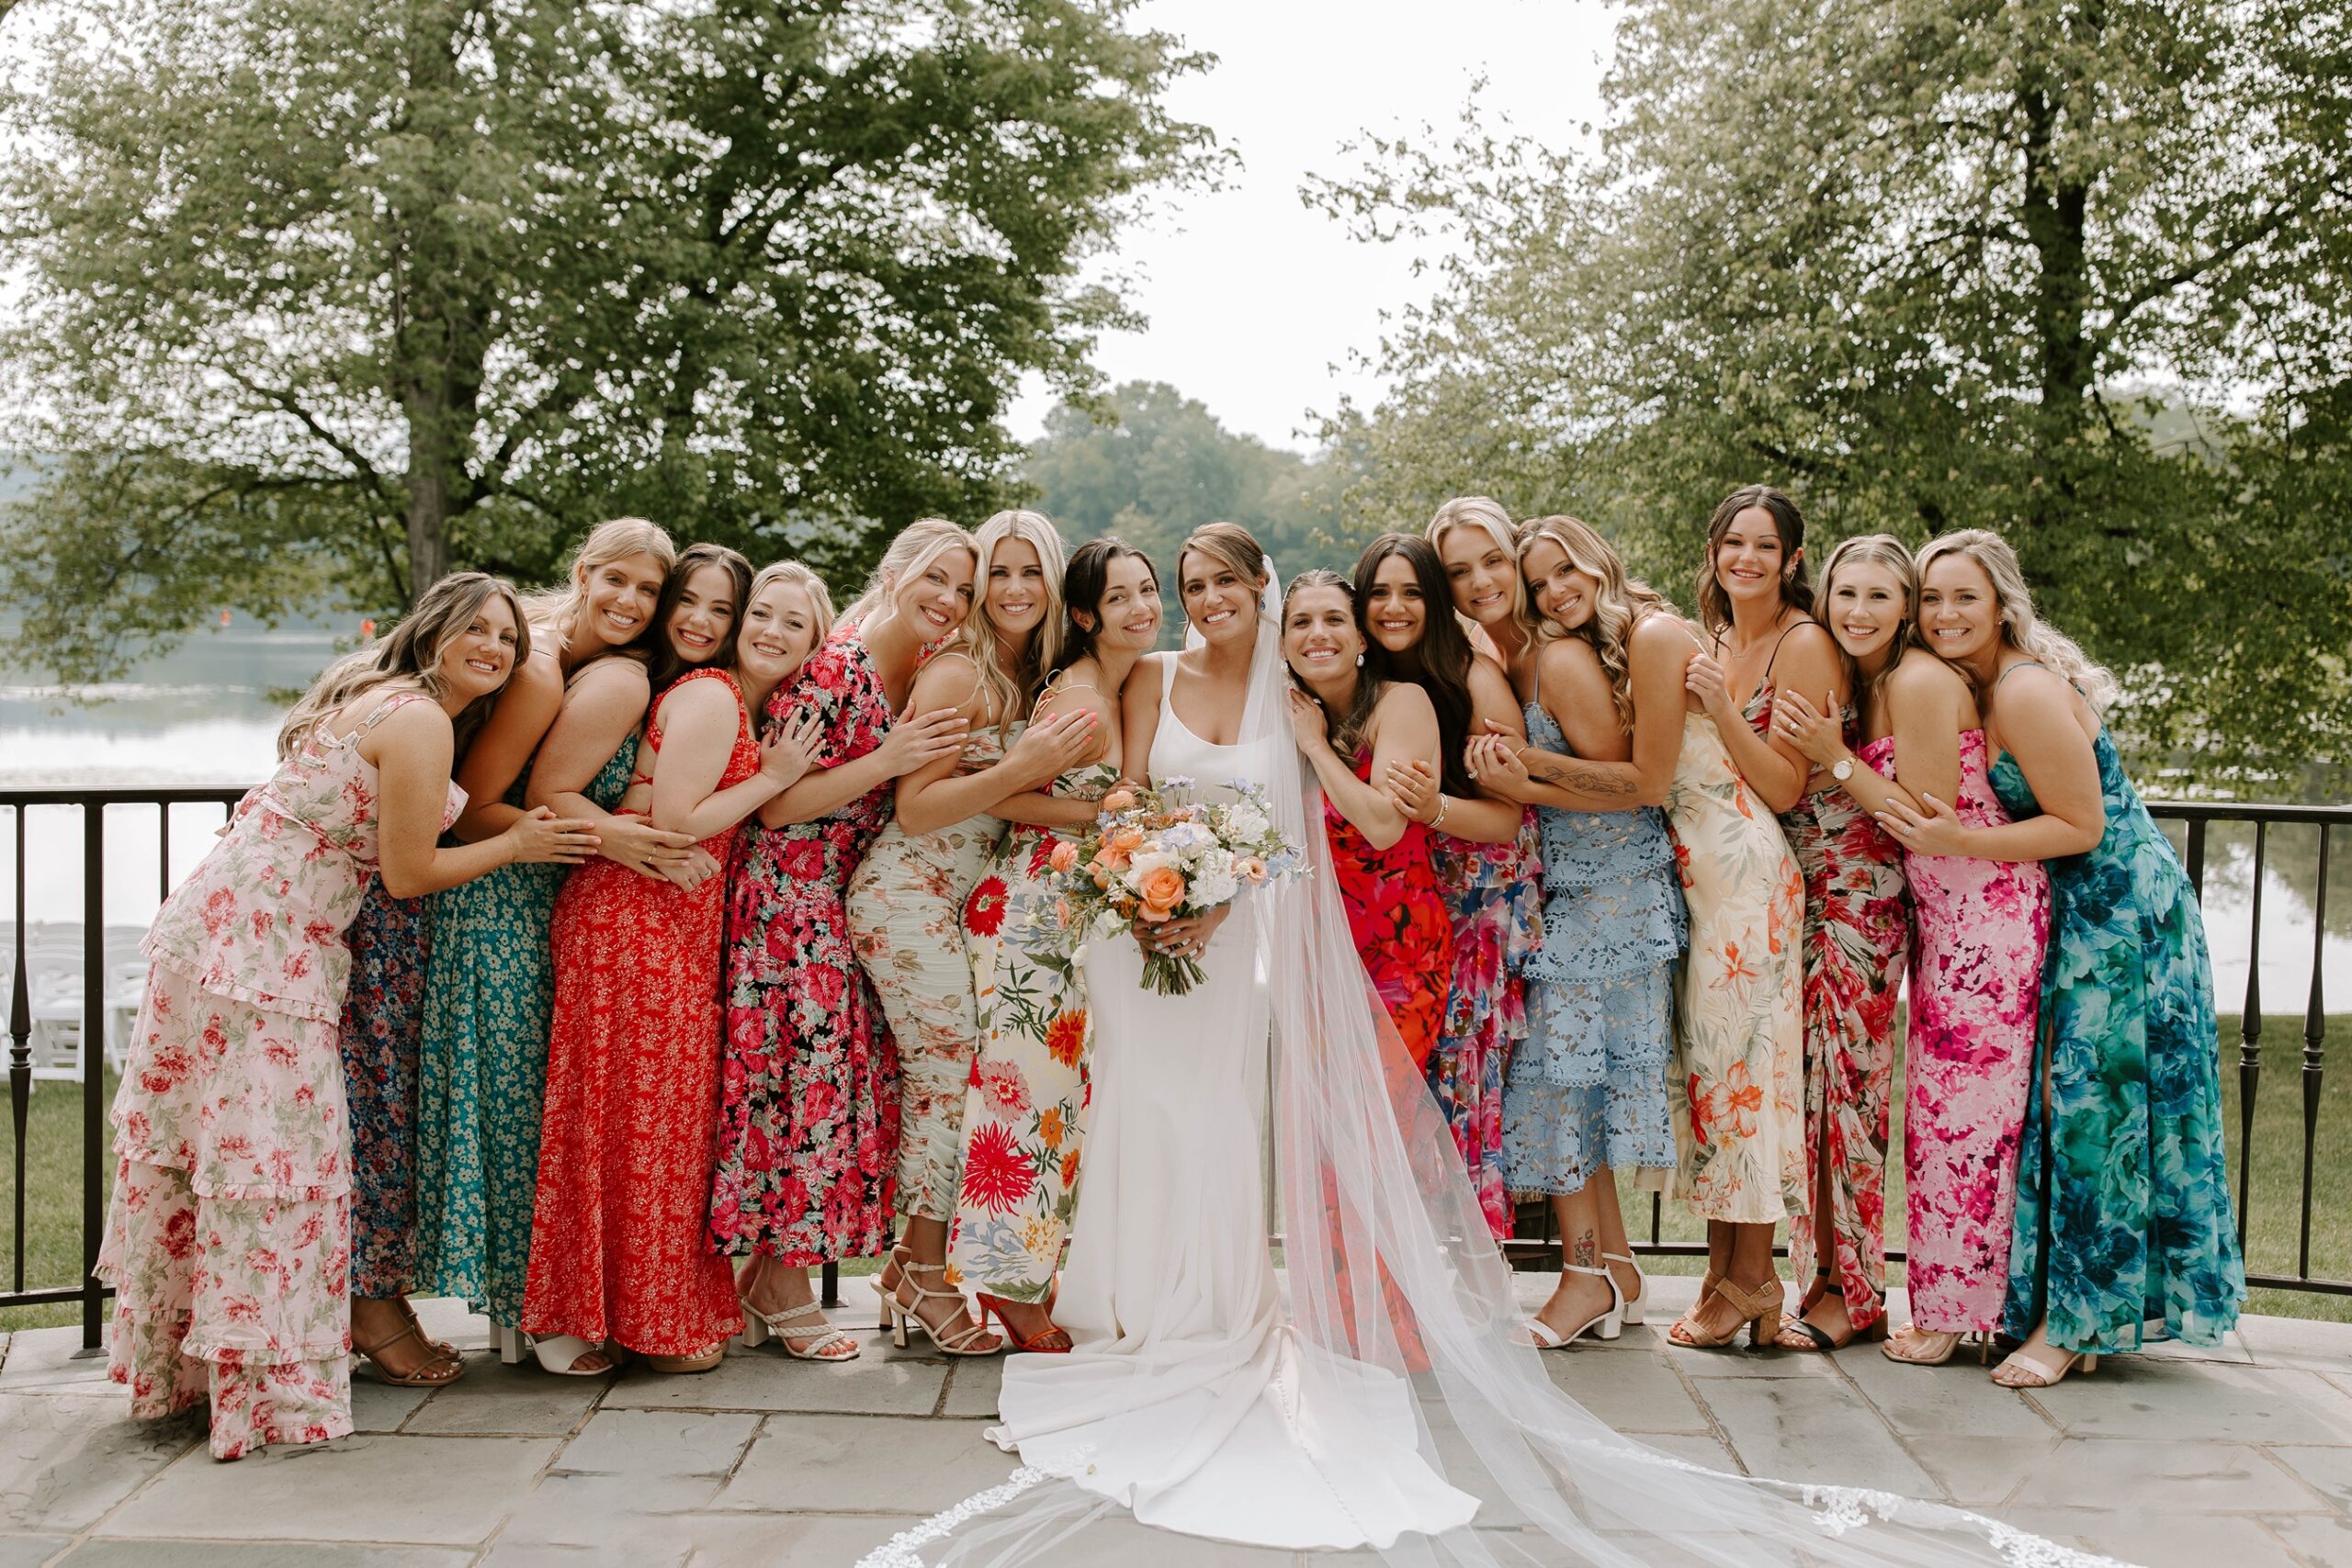 Bride poses with bridesmaids in colorful dresses